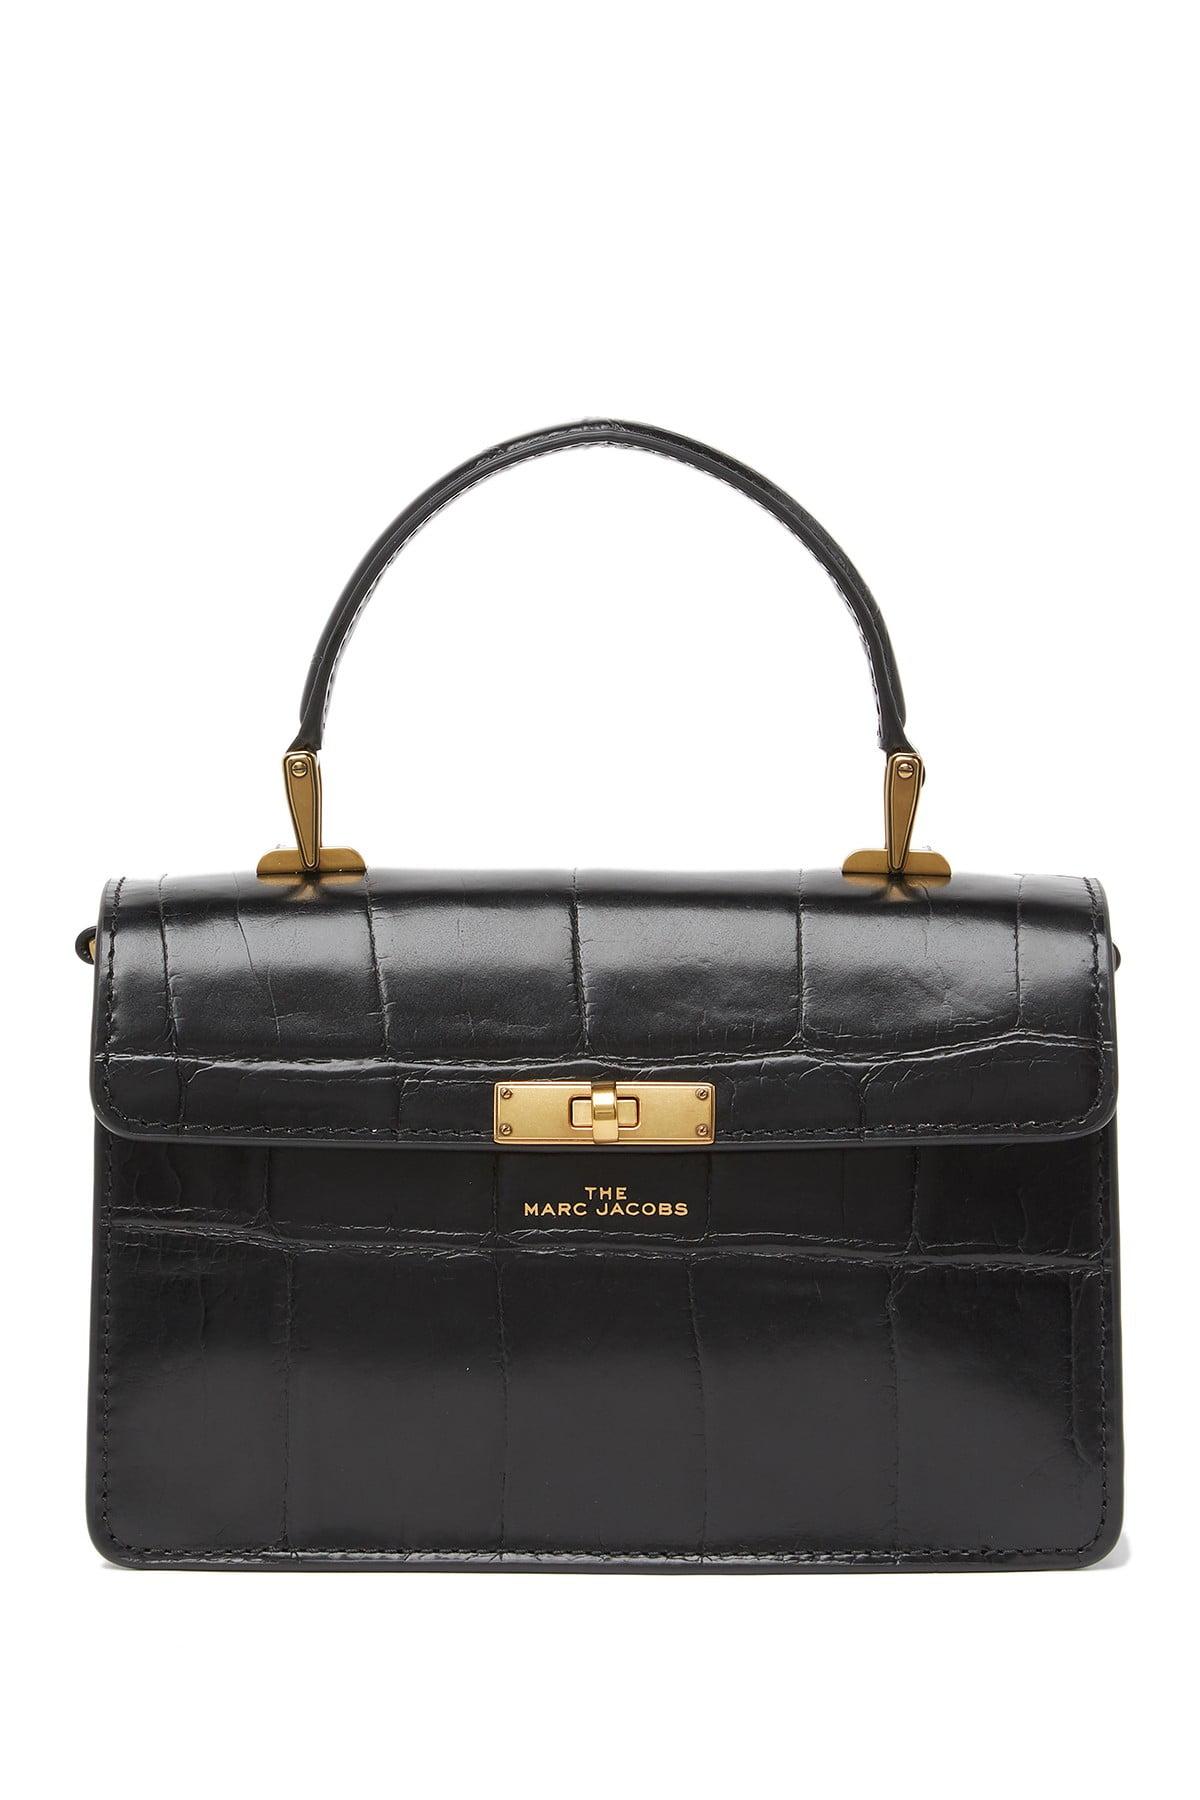 Marc Jacobs The Downtown Croc Embossed Leather Shoulder Bag in Black | Lyst